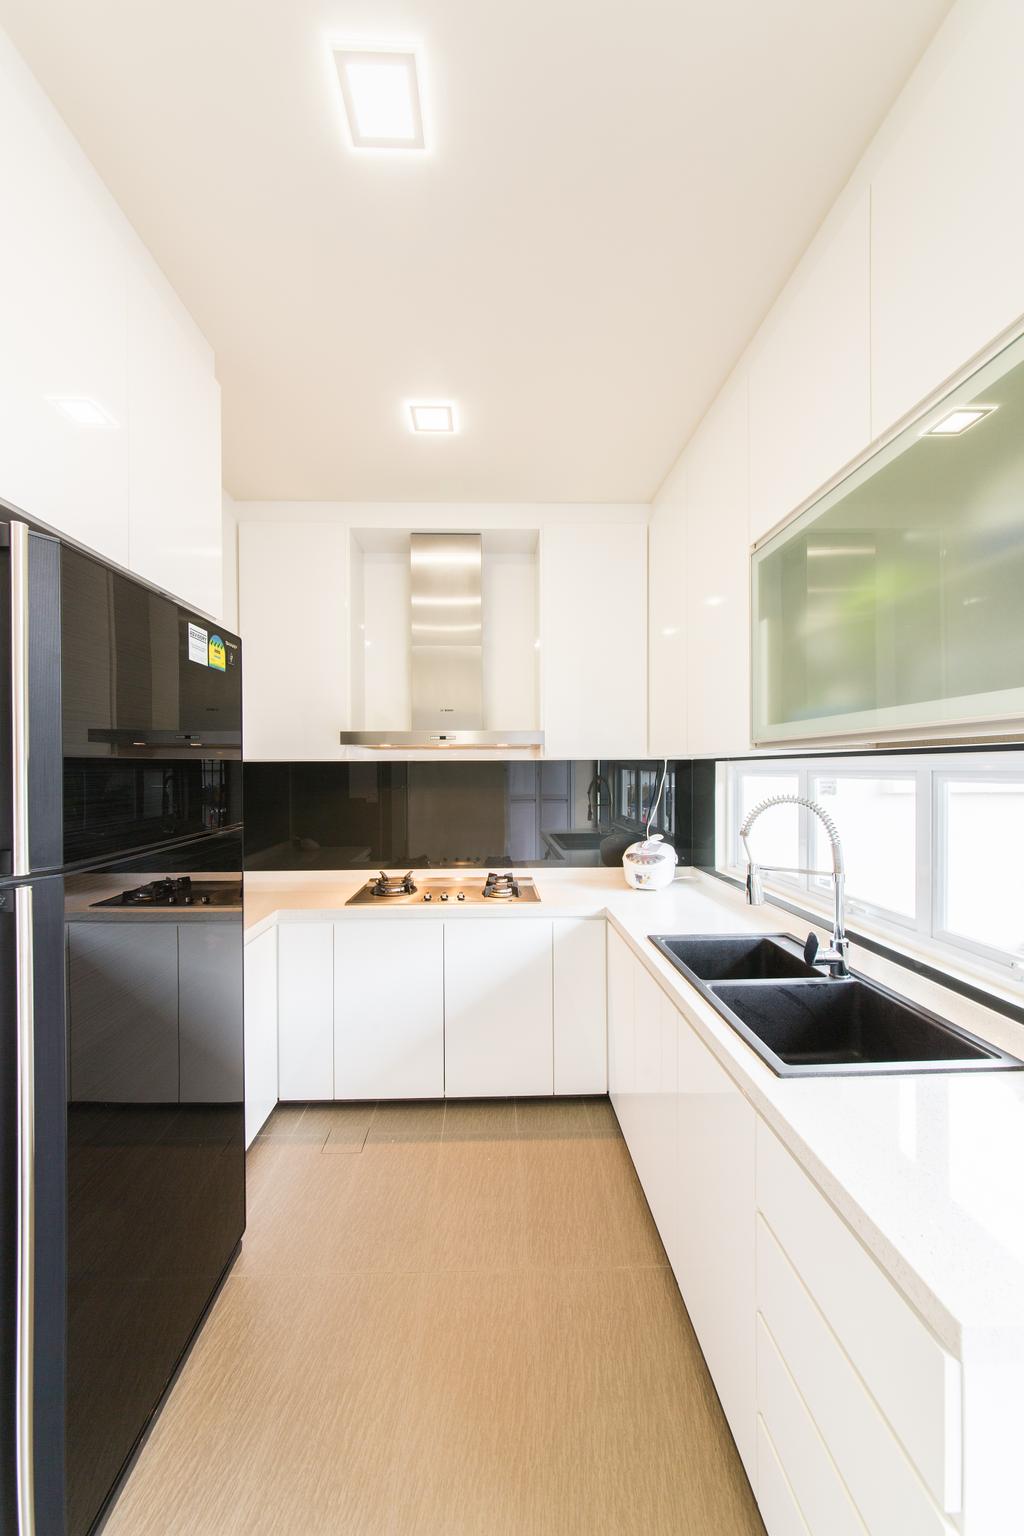 Contemporary, Landed, Kitchen, 25A Parry Avenue, Interior Designer, Corazon Interior, Cooking Hood, Laminated Floor, Cooker Hood, Light Wood, Wooden Flooring, White Cabinet, Recessed Lights, Indoors, Interior Design, Room, Appliance, Electrical Device, Oven, Bathroom